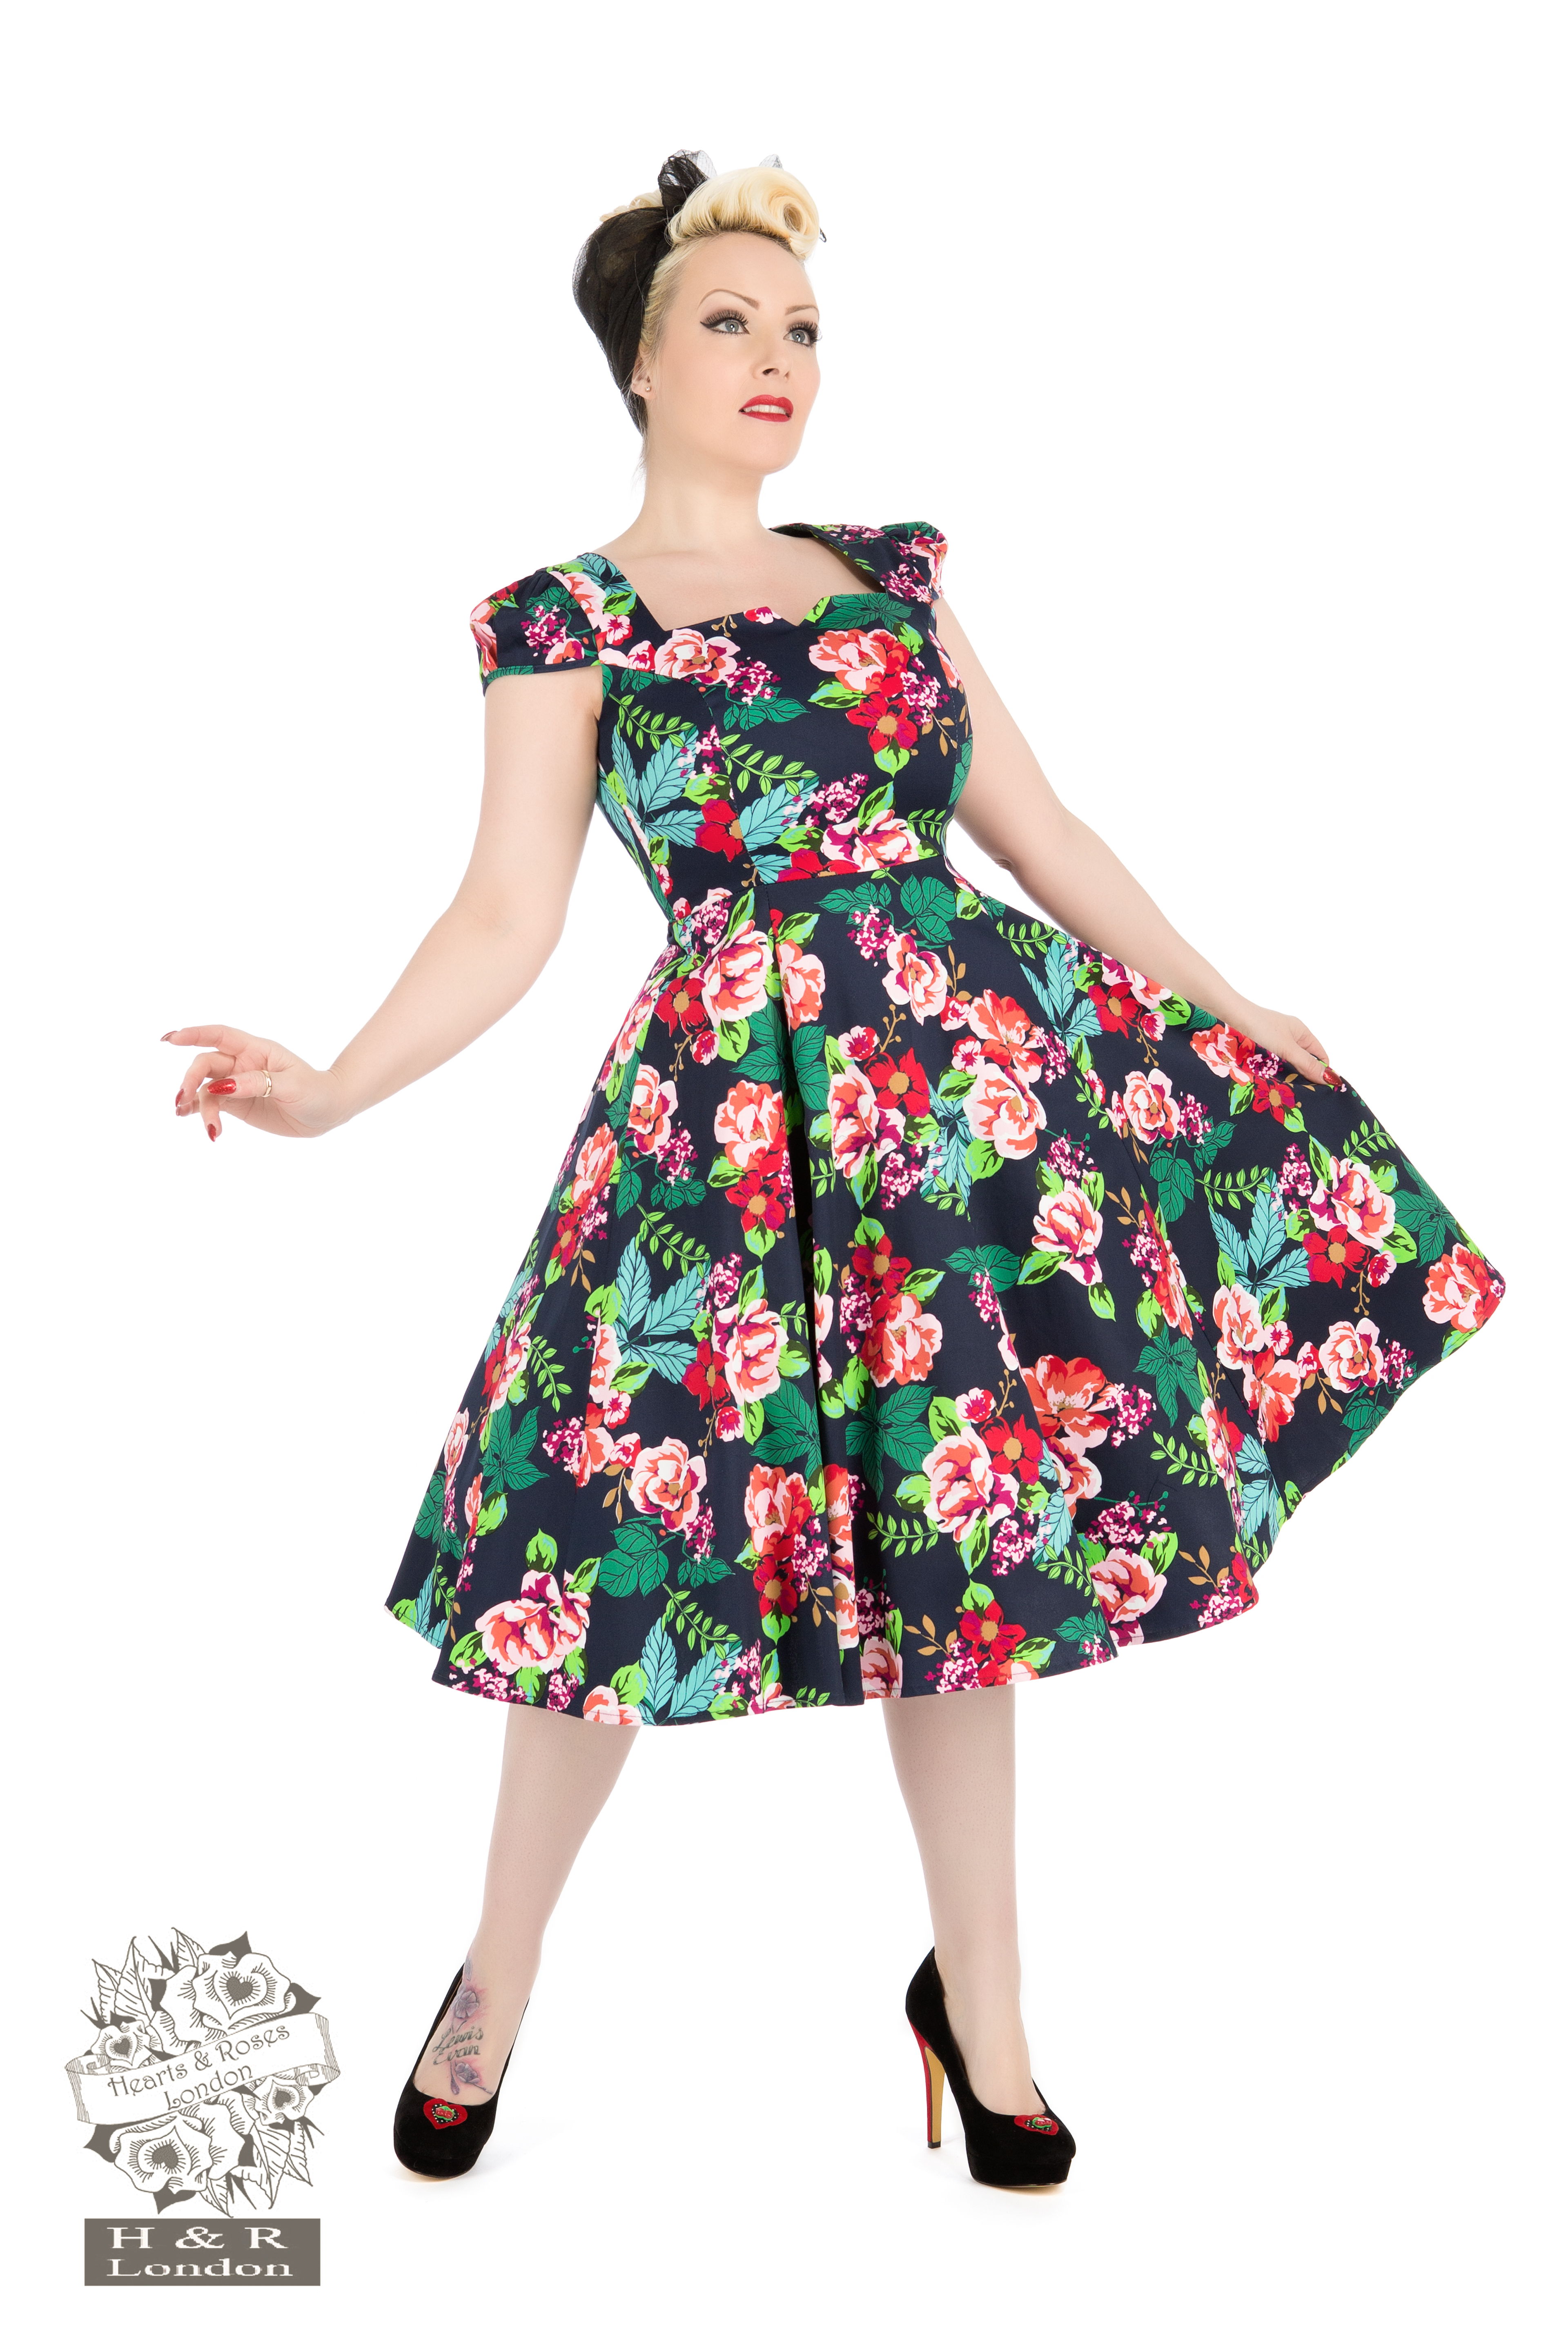 Hearts & Roses London Deepest Green Vintage Retro 1950s Floral Flared Tea Dress 